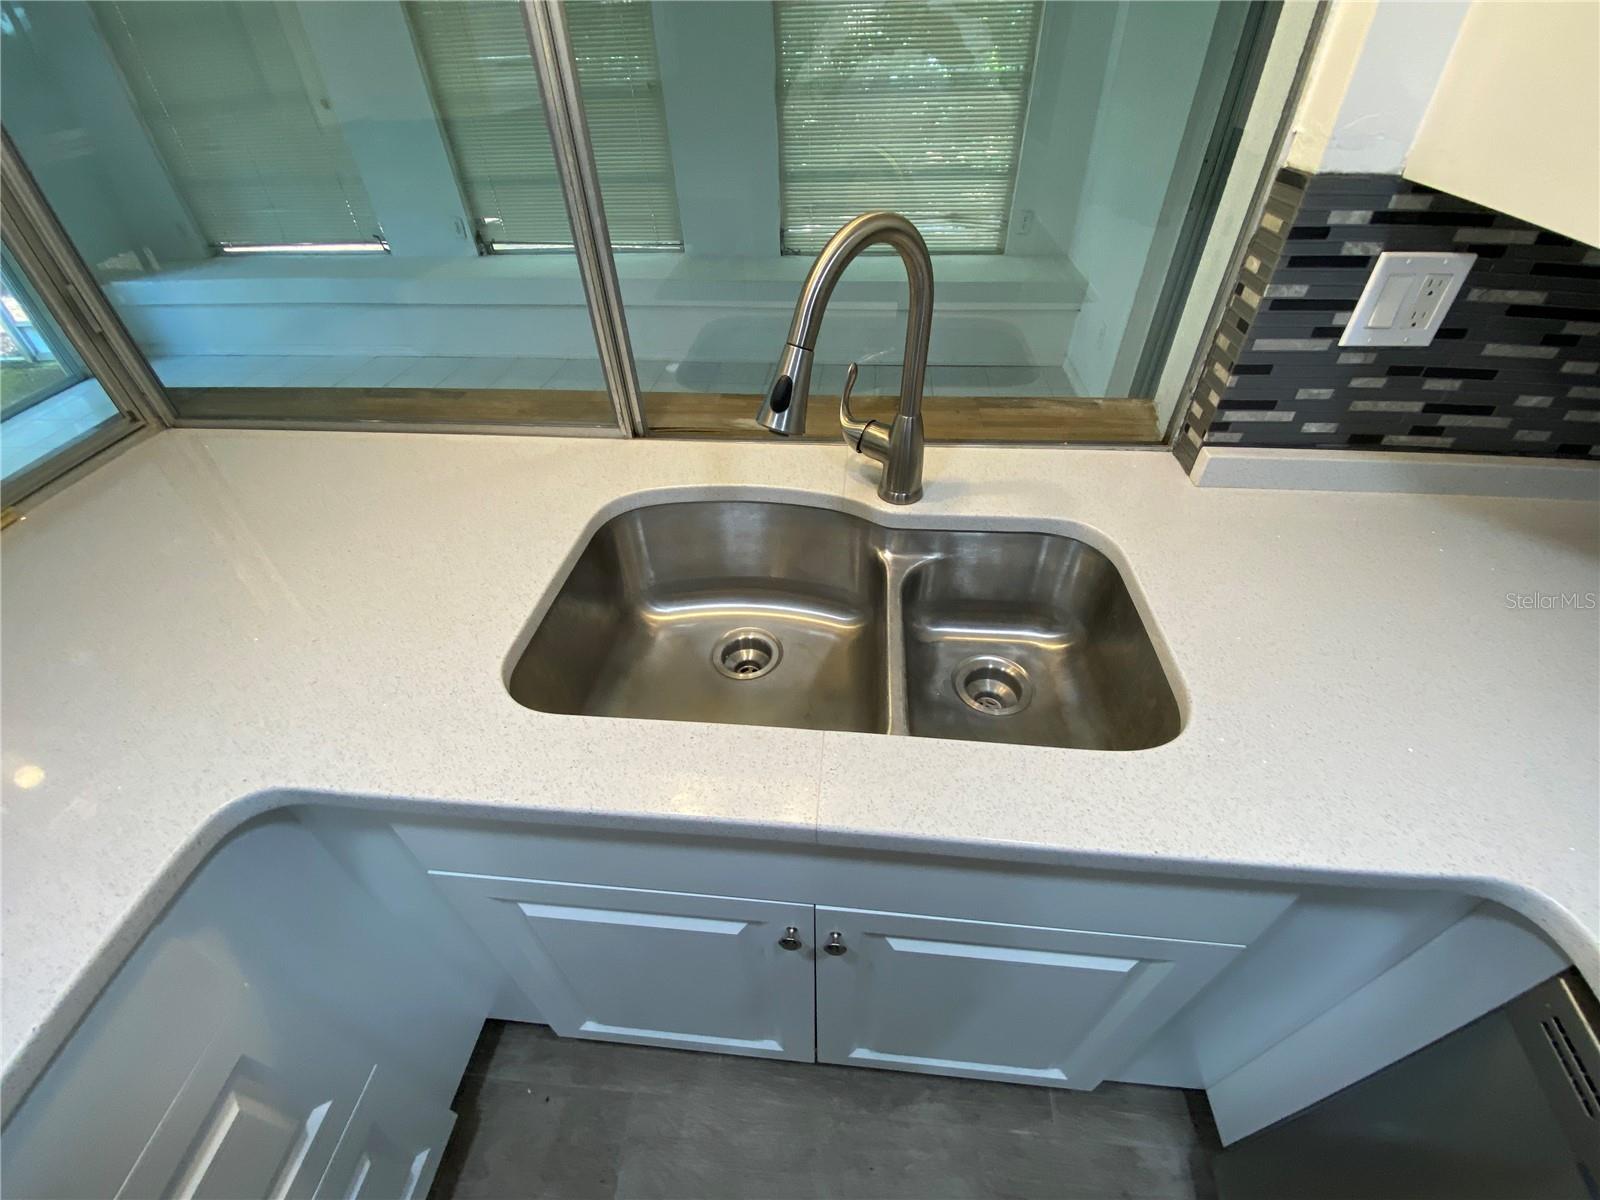 Kitchen sink with enclosed porch beyond it sliding glass window